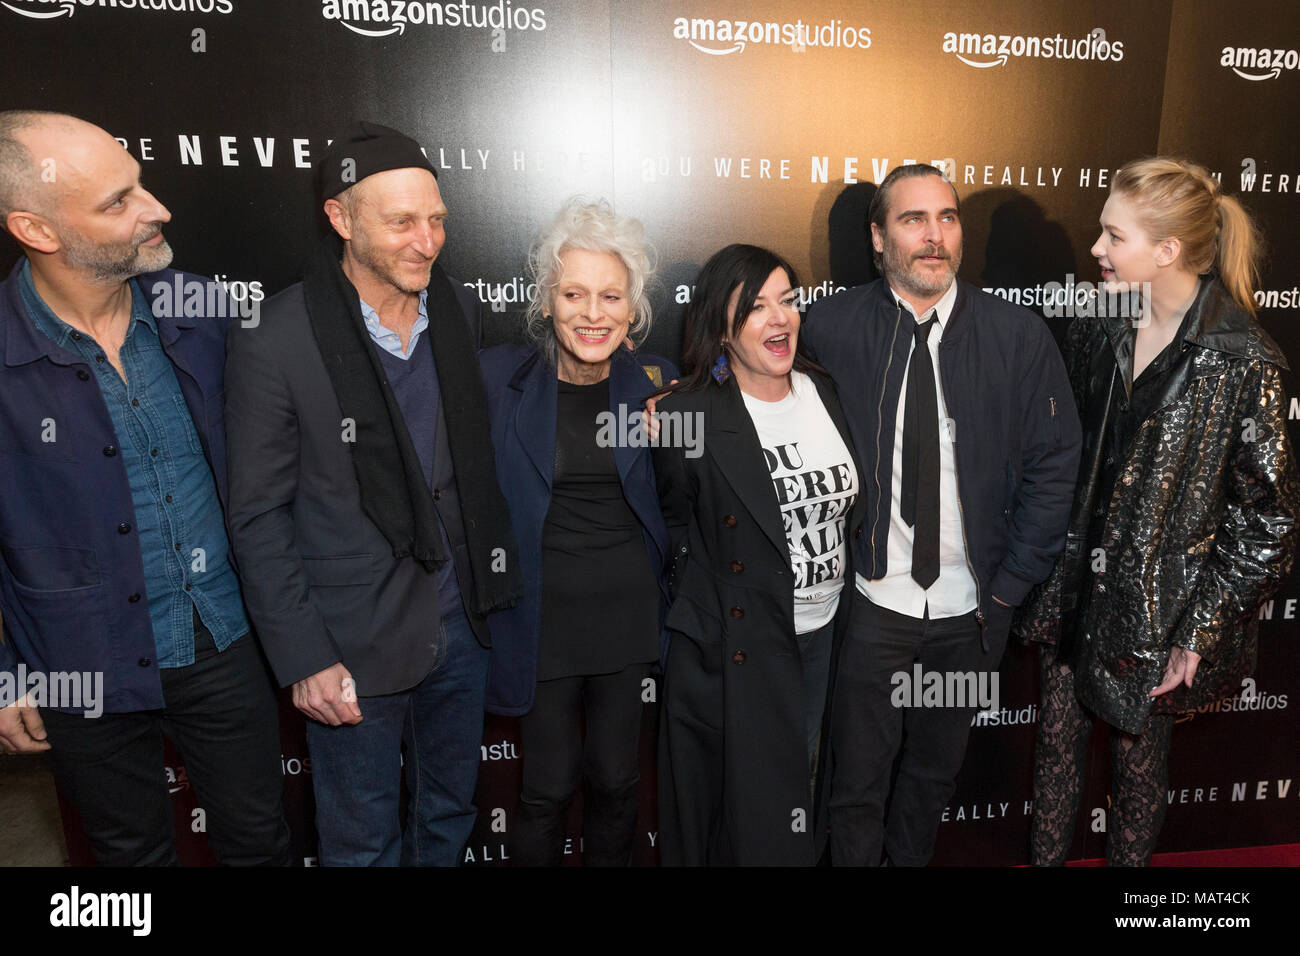 New York, NY - April 3, 2018: Cast attends the New York special screening of Amazon Studios You Were Never Really Here at Metrograph Credit: lev radin/Alamy Live News Stock Photo